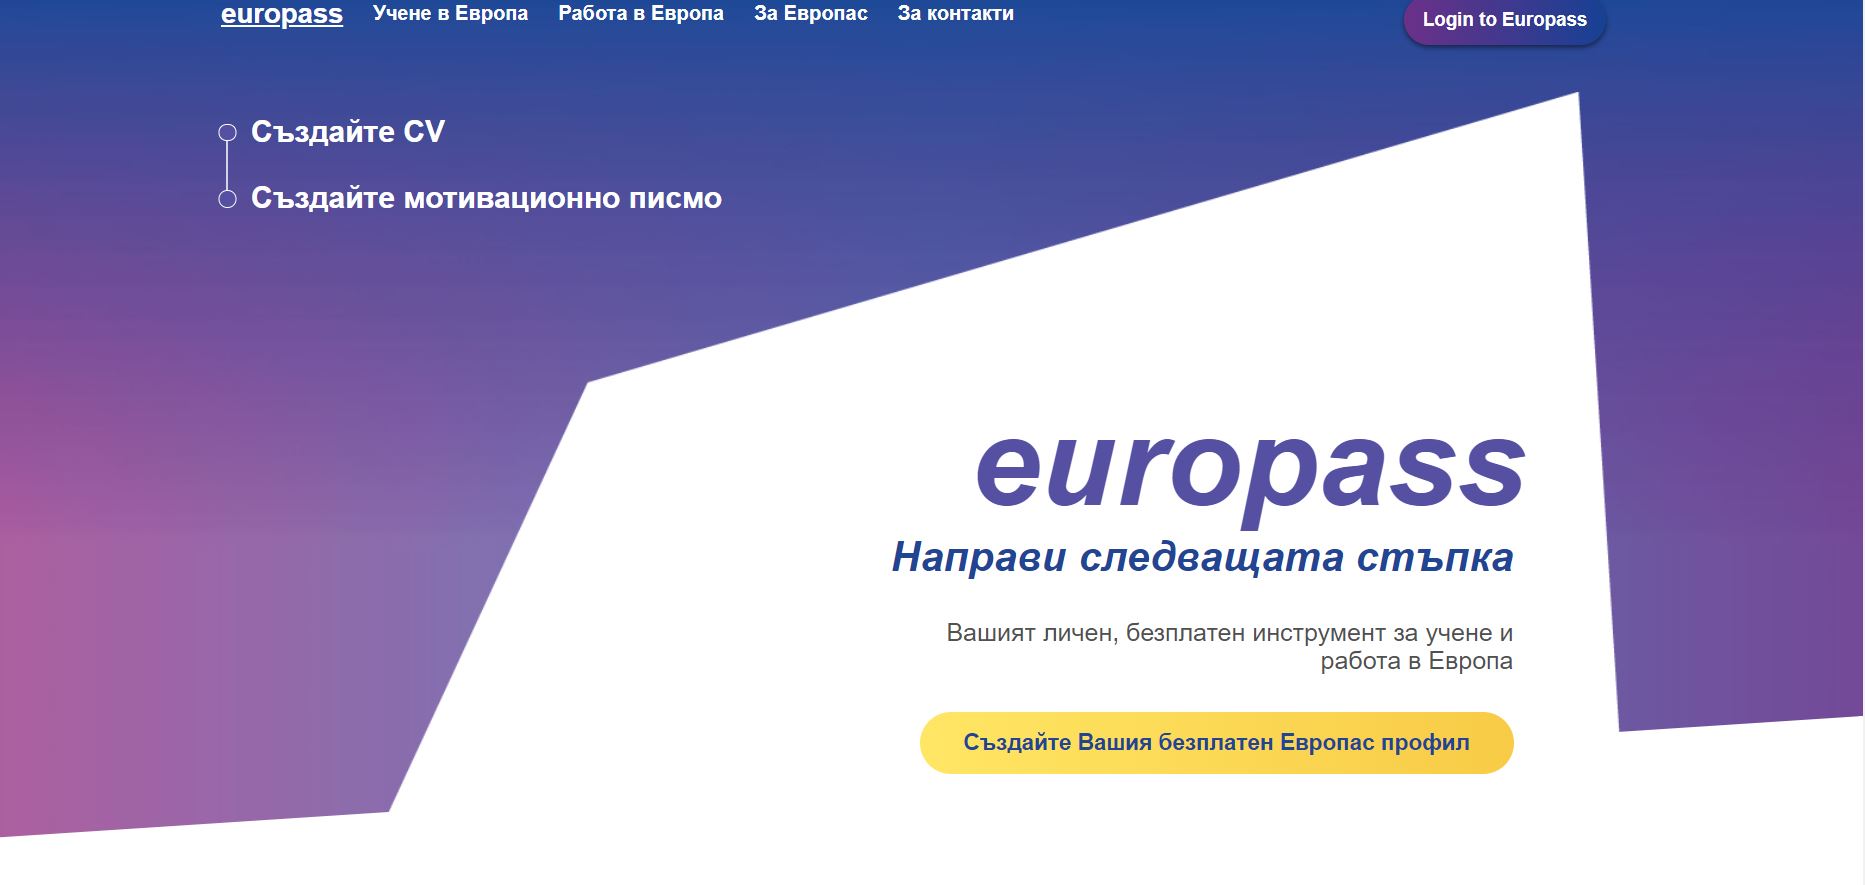 The Commission has launched the new version of the Europass platform